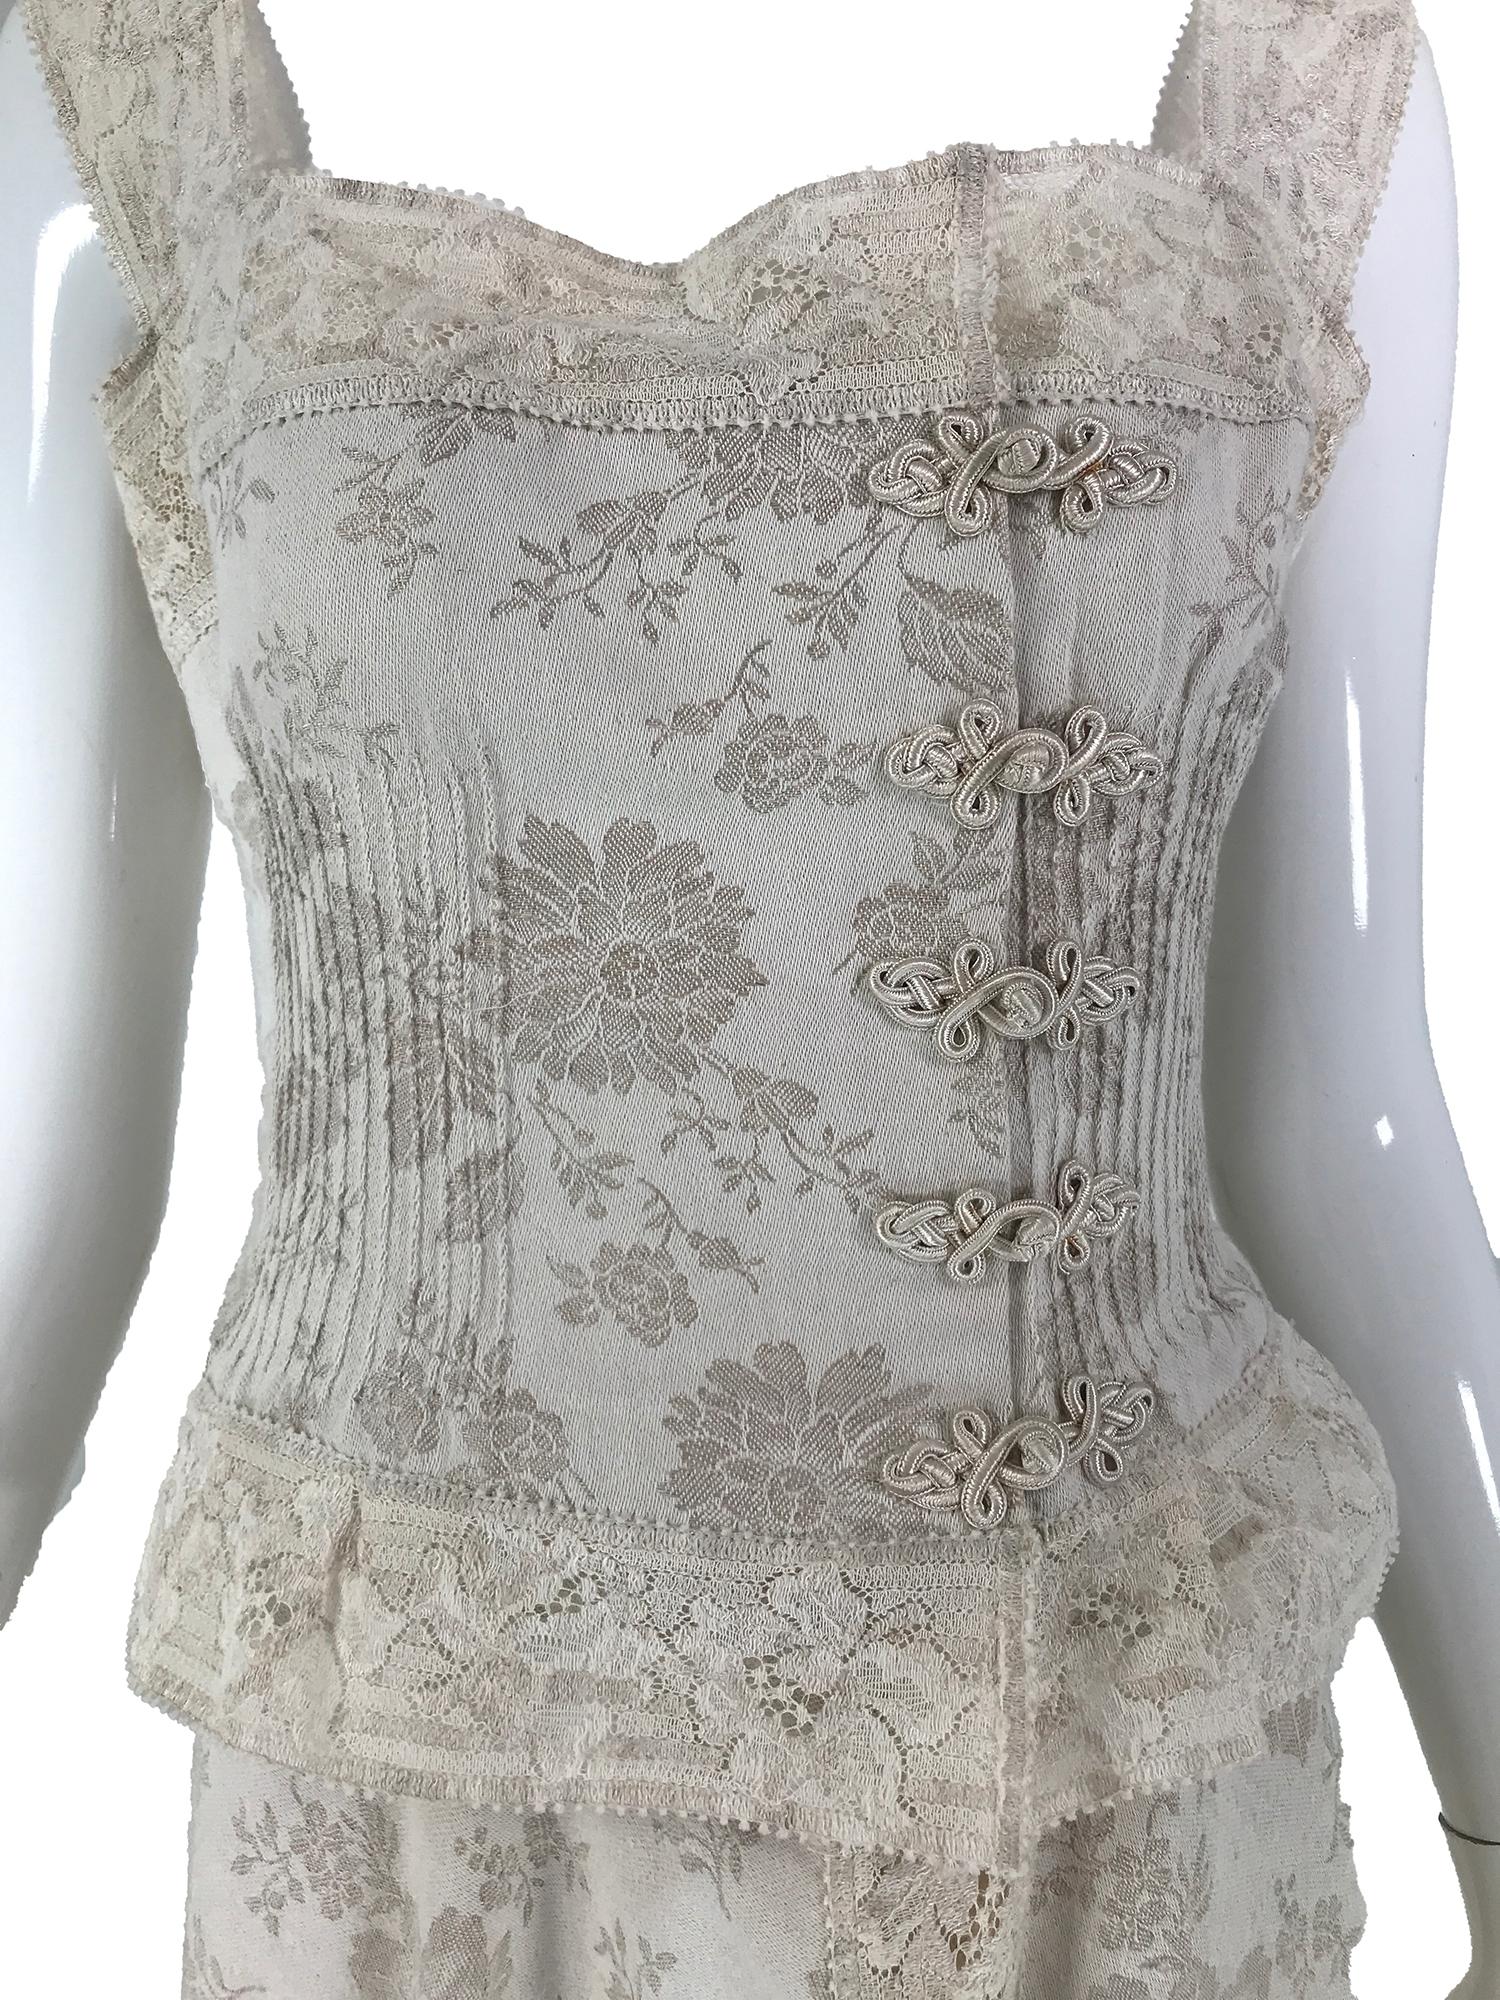 Valentino Boutique ivory floral damask linen and lace camisole top and skirt. Beautiful ivory lace yoke and straps, pinch pleated, fitted waist camisole top closes at the front side with hidden snaps and frogs at the front, the hem is edged in lace,